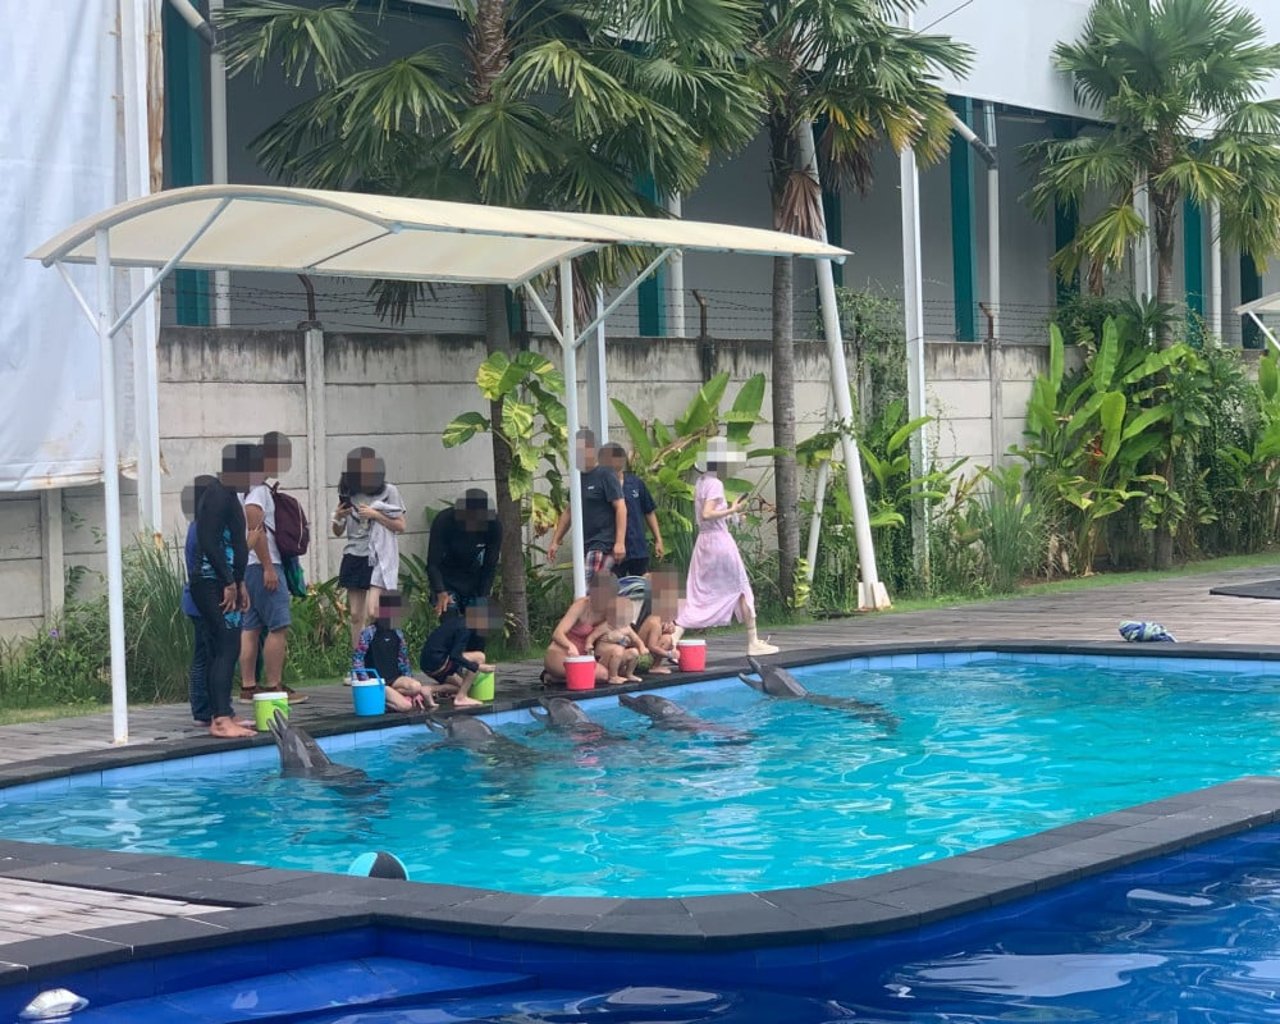 Captive dolphins entertaining a group of people